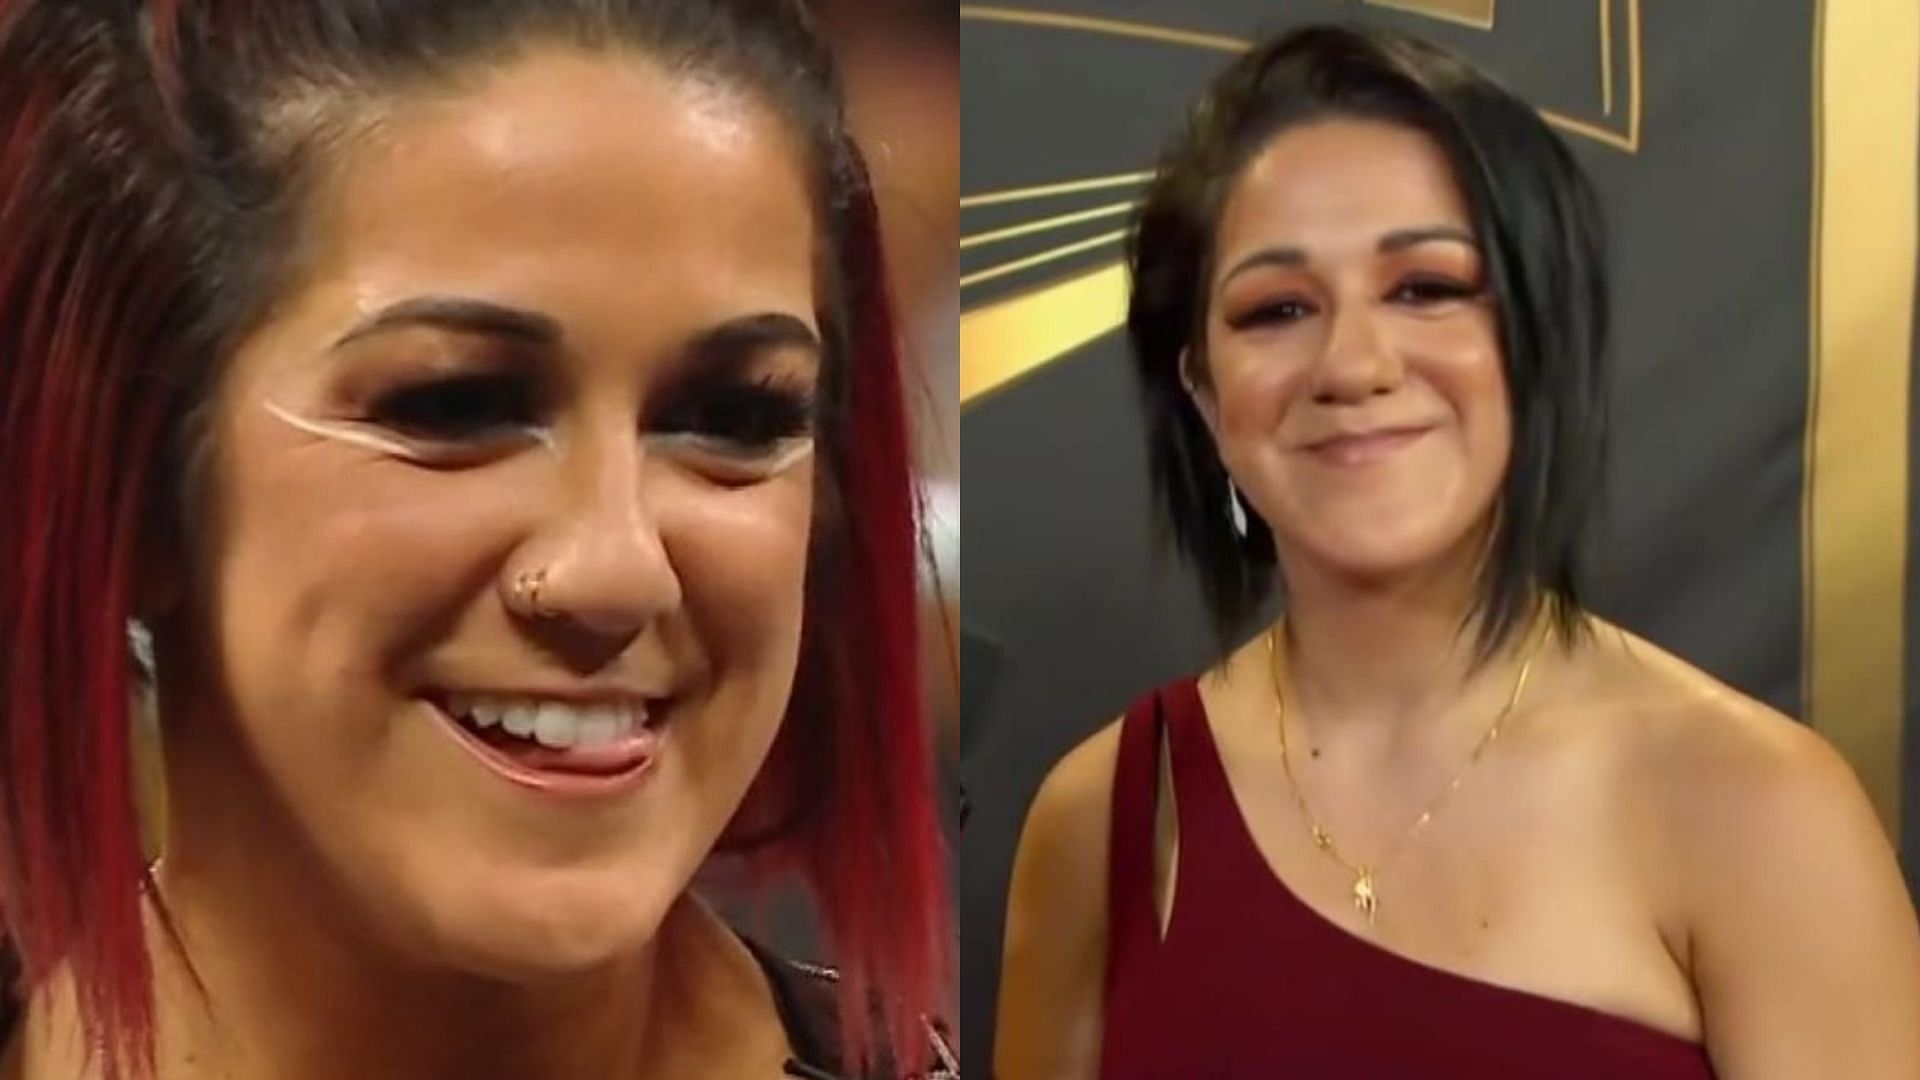 Bayley is the leader of Damage CTRL